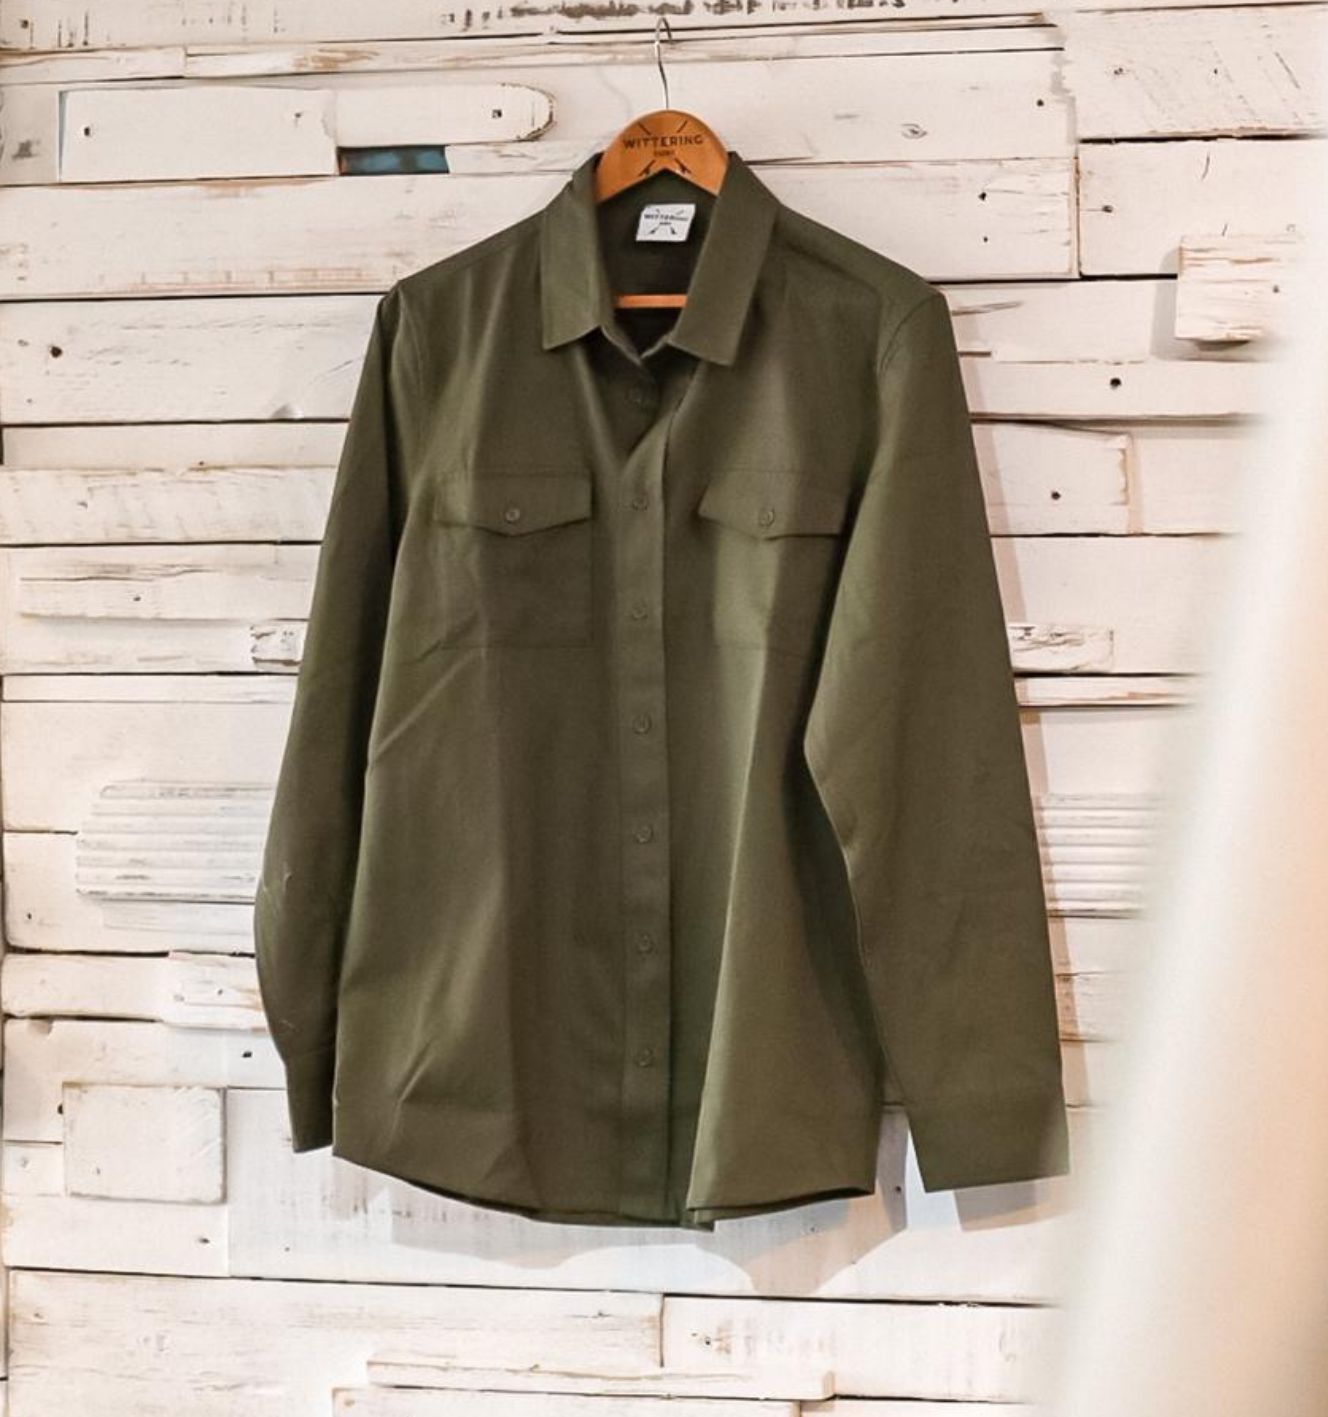 MILITARY SHIRT - ARMY GREEN - Wittering Surf Shop